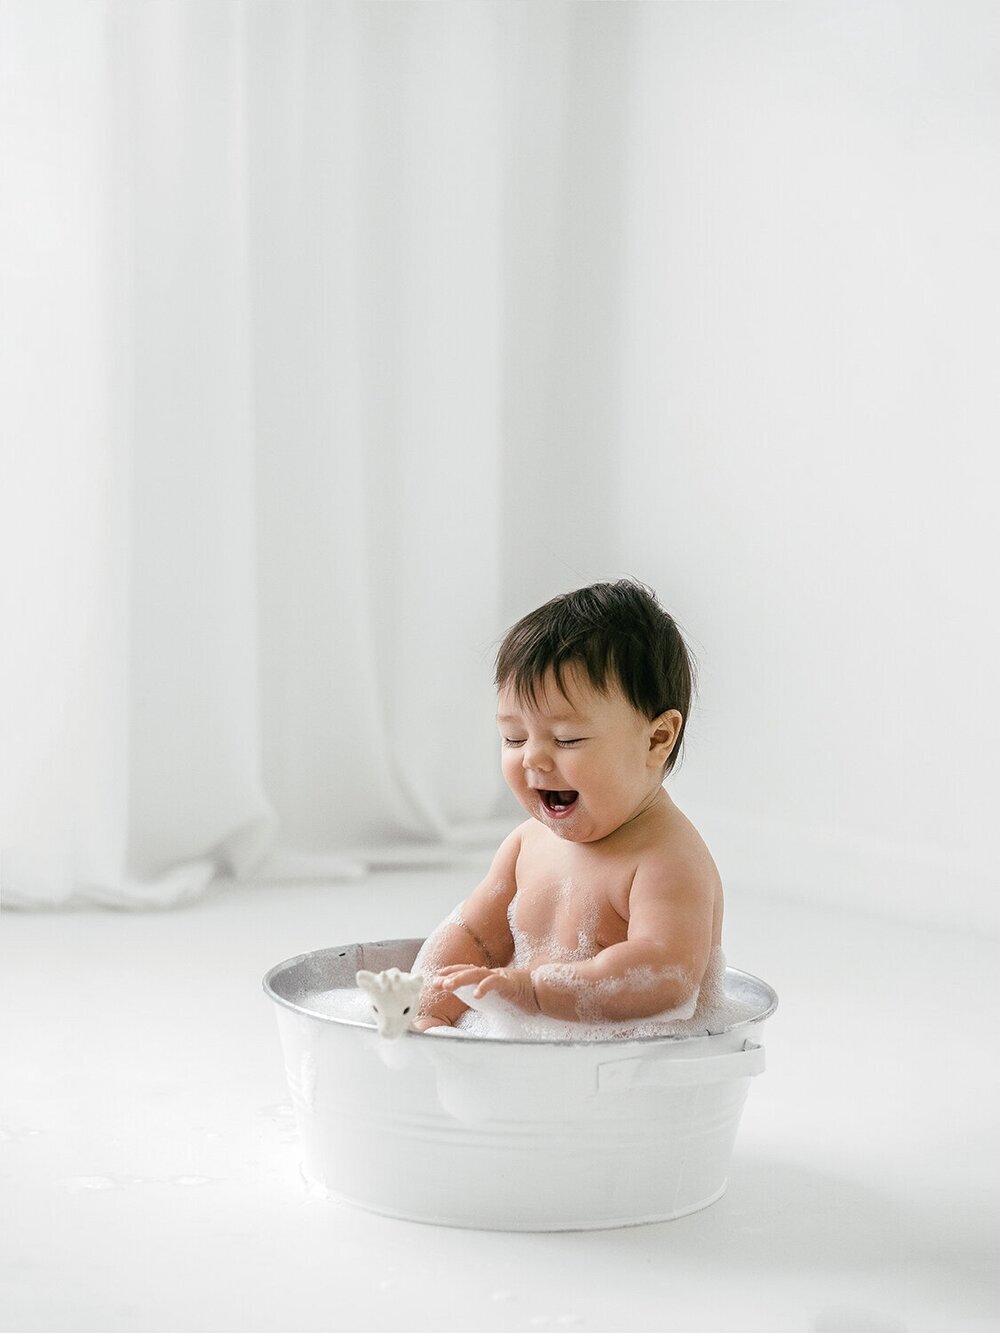 Older baby photoshoot with  baby laughing in the bath